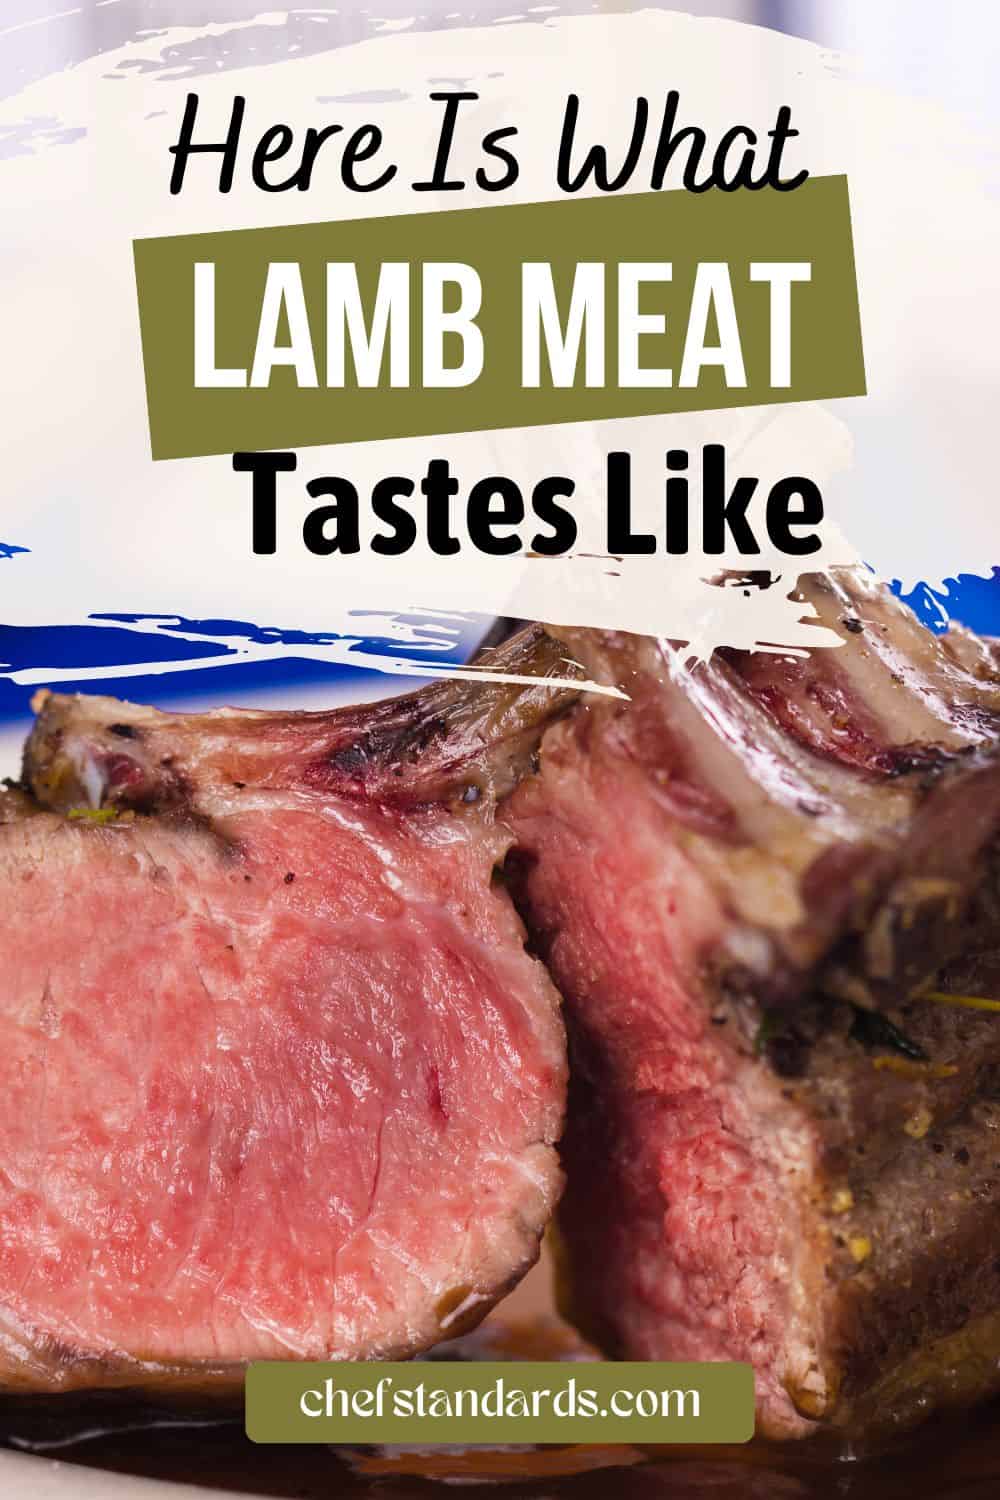 3 Comparisons To What Does Lamb Taste Like
